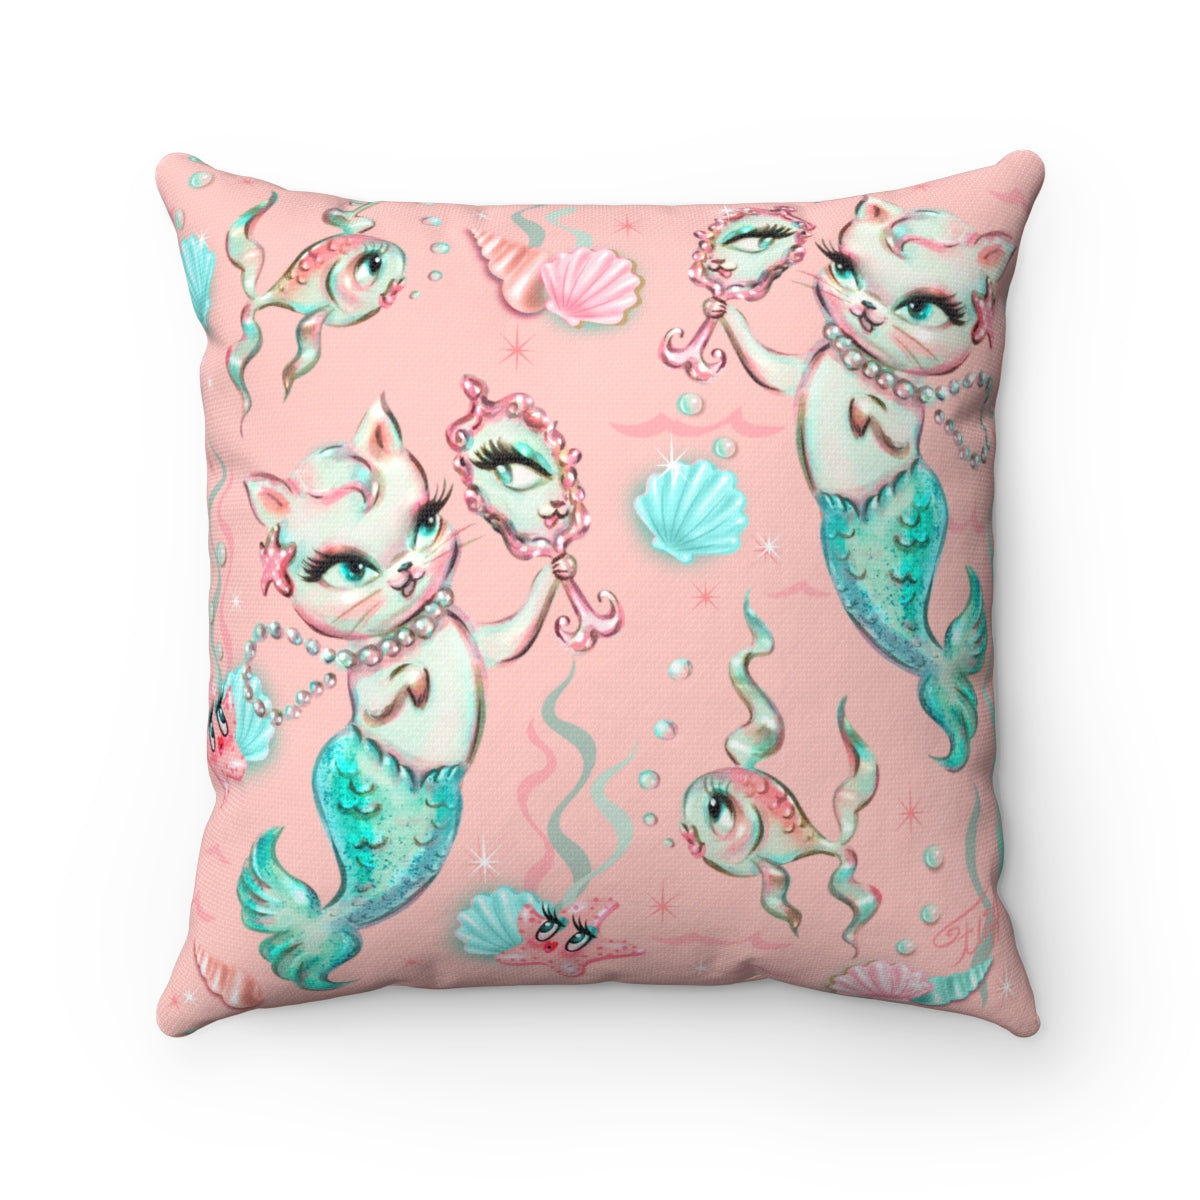 Merkittens with Pearls • Square Pillow